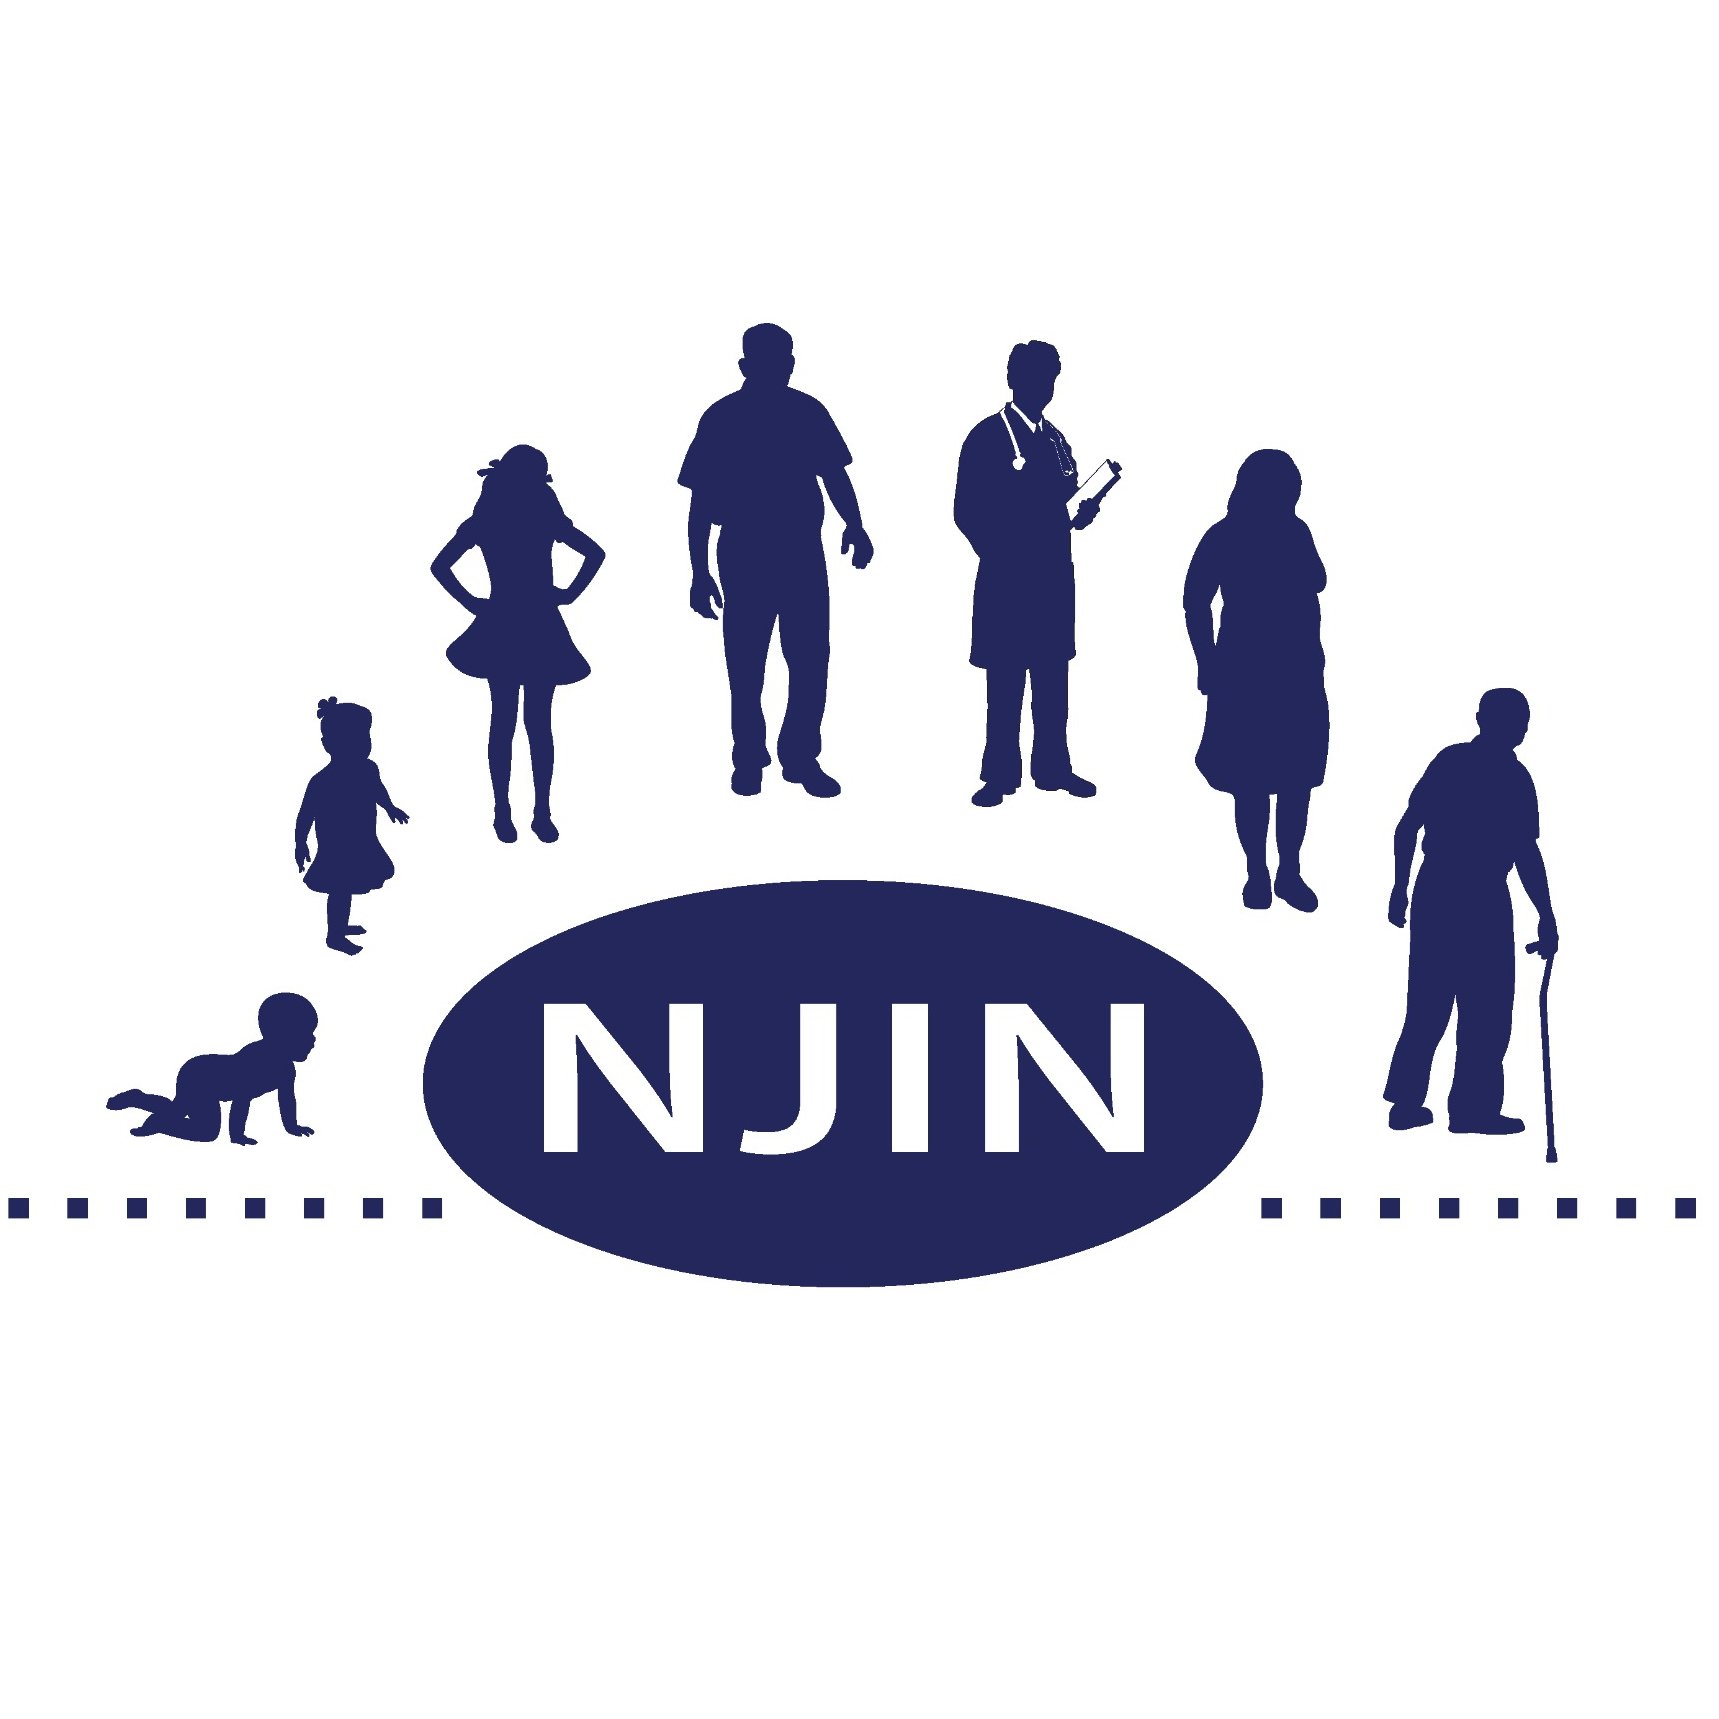 NJIN is a statewide coalition to protect the health of all individuals through timely, age appropriate immunization against vaccine-preventable diseases.